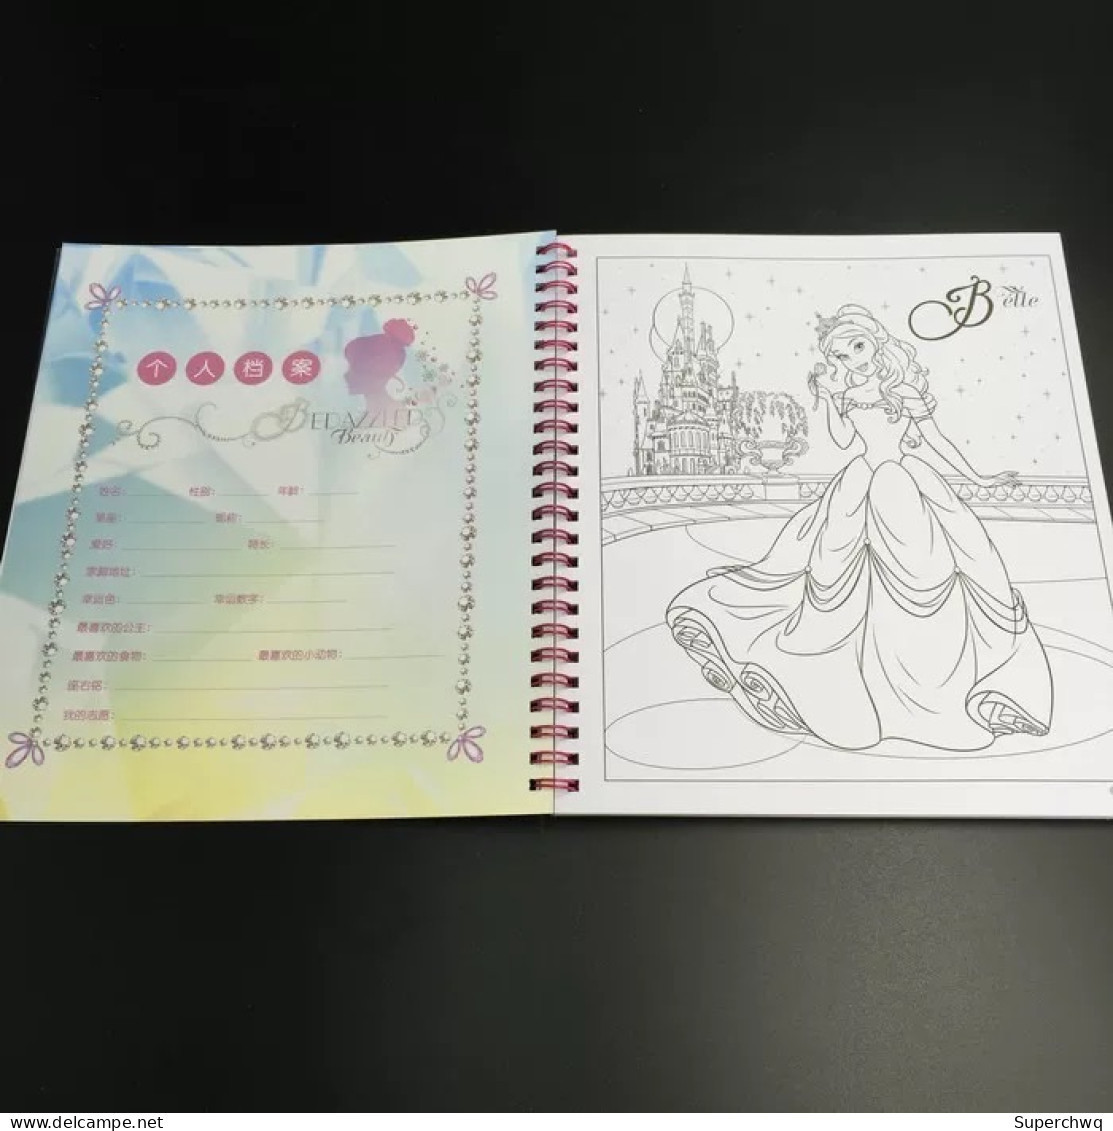 China Stamped Shanghai Philatelic Corporation Releases Disney Princess Personalized - Colored Album - Unused Stamps